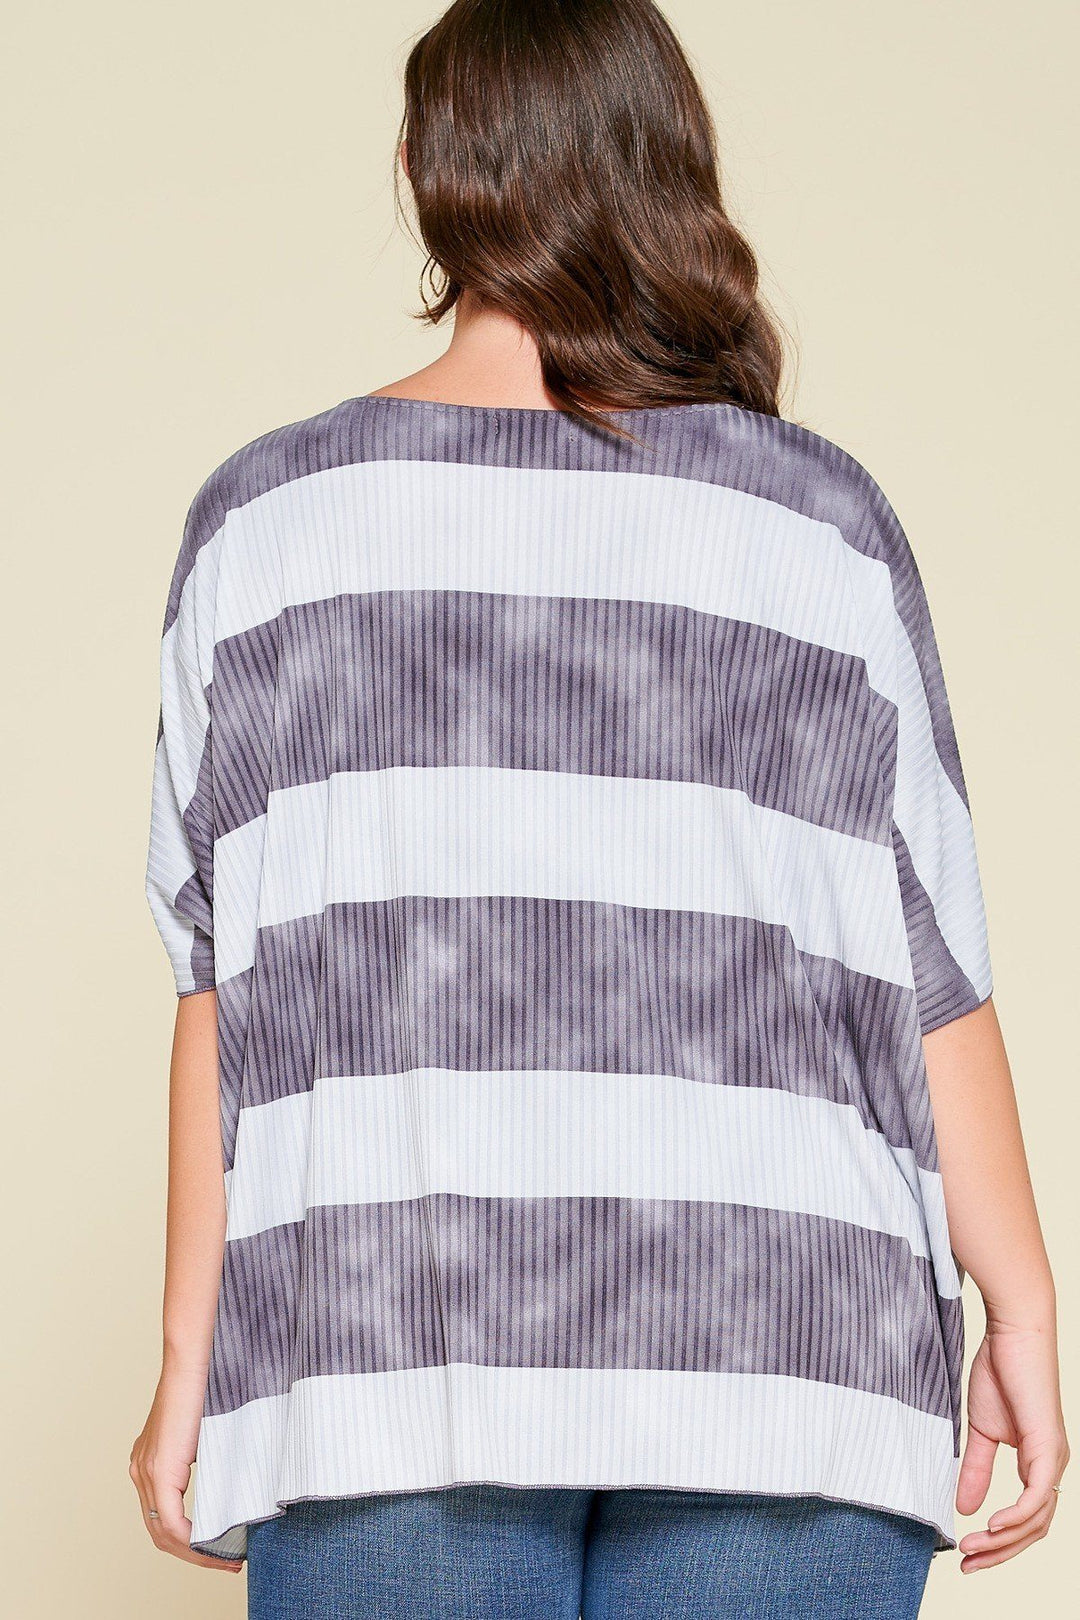 Stripe Printed Pleated Blouse Featuring A Boat Neckline And 1/2 Sleeves in Blue